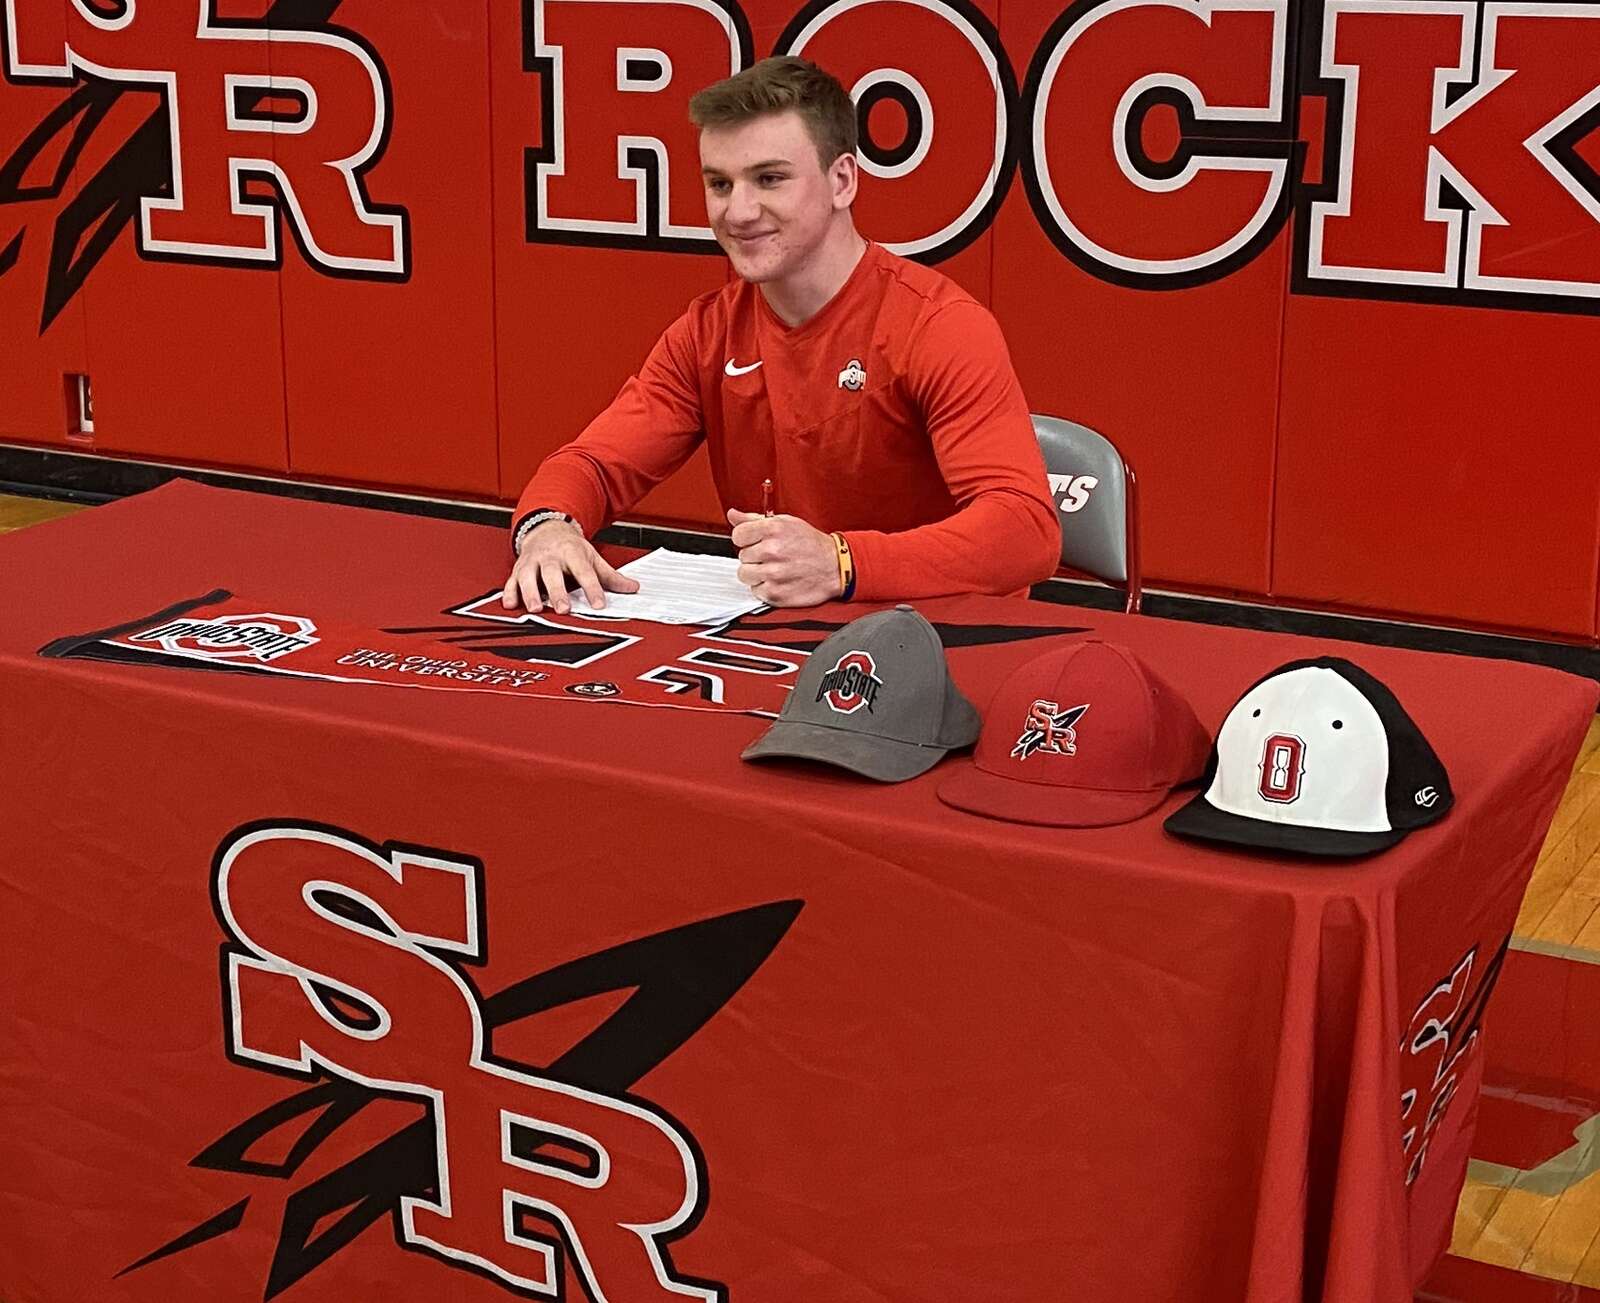 Slippery Rock High School senior and baseball standout Sal Mineo signs his letter of intent